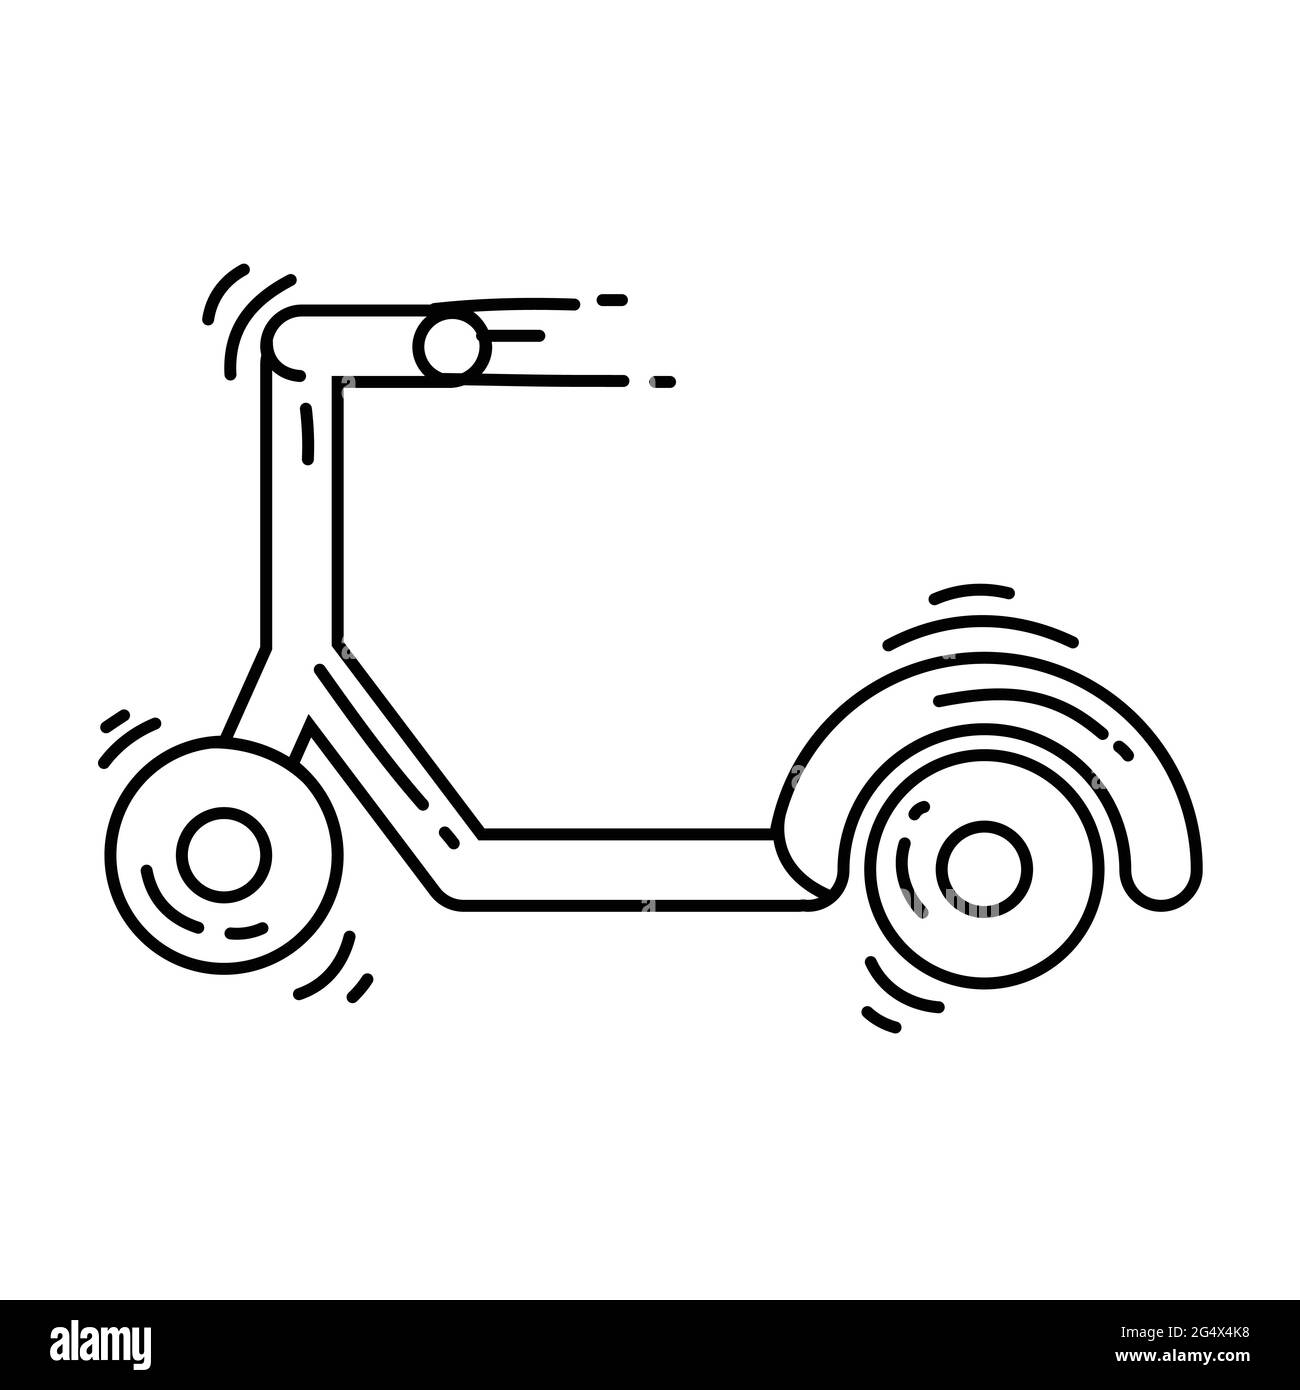 Playground kids scooter,playing,children,kindergarten. hand drawn icon set, outline black, doodle icon, vector icon design. Stock Vector